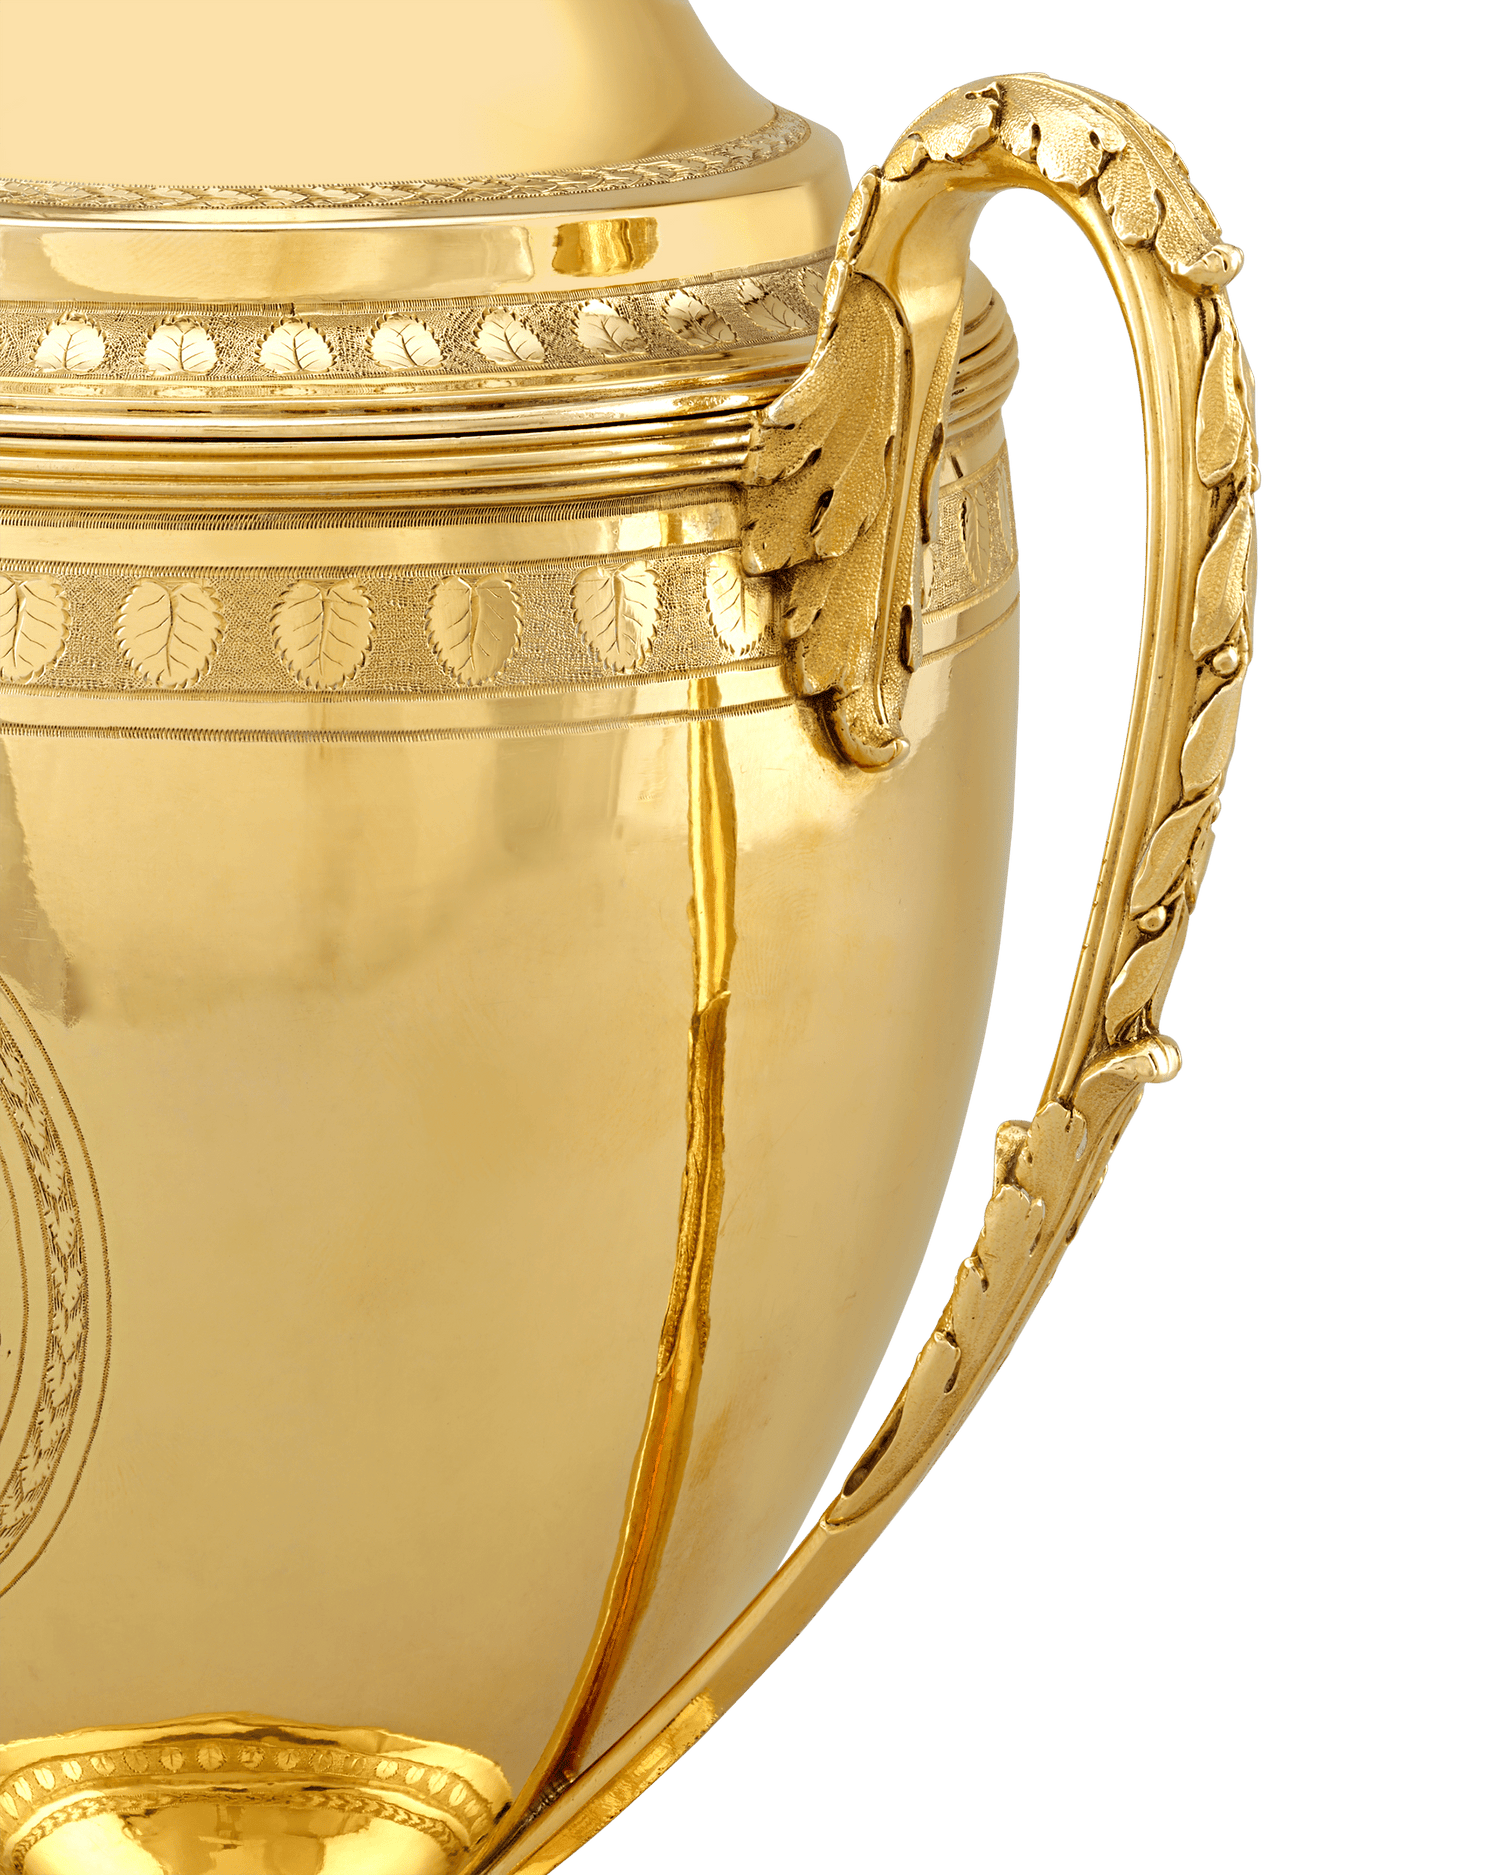 The Yates Gold Cup